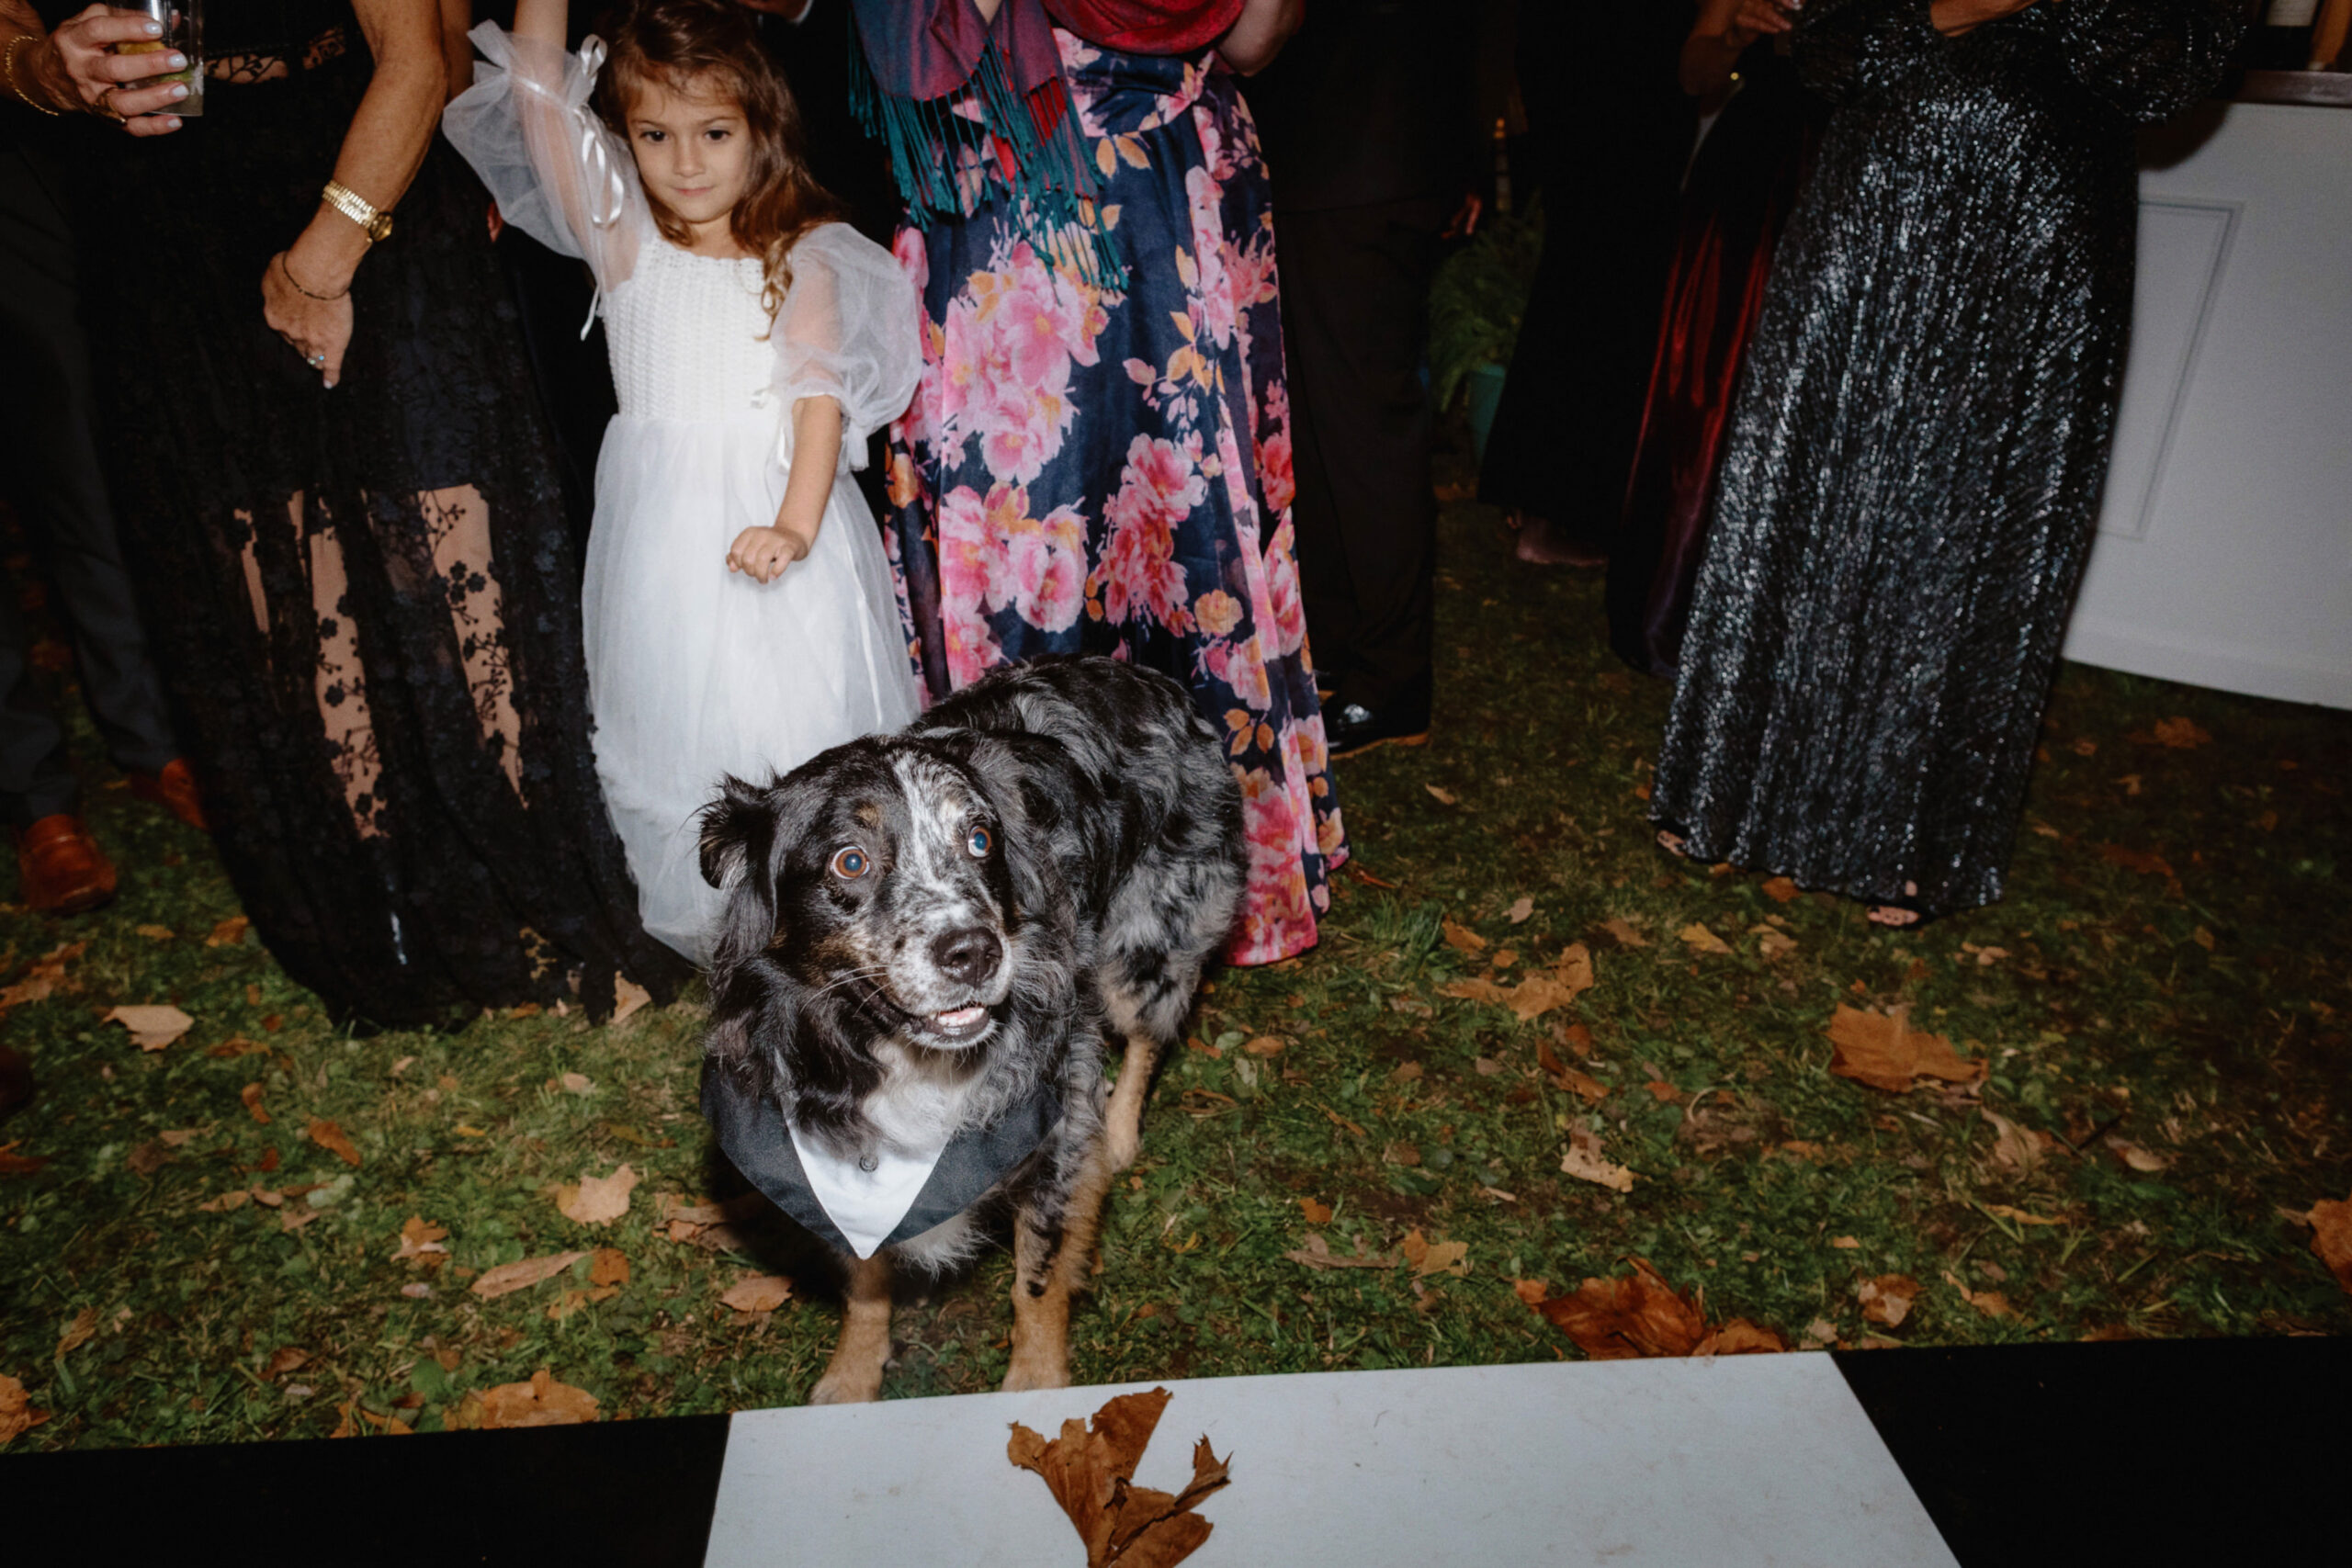 The newlywed's dog is having fun in the wedding. Image by Jenny Fu Studio